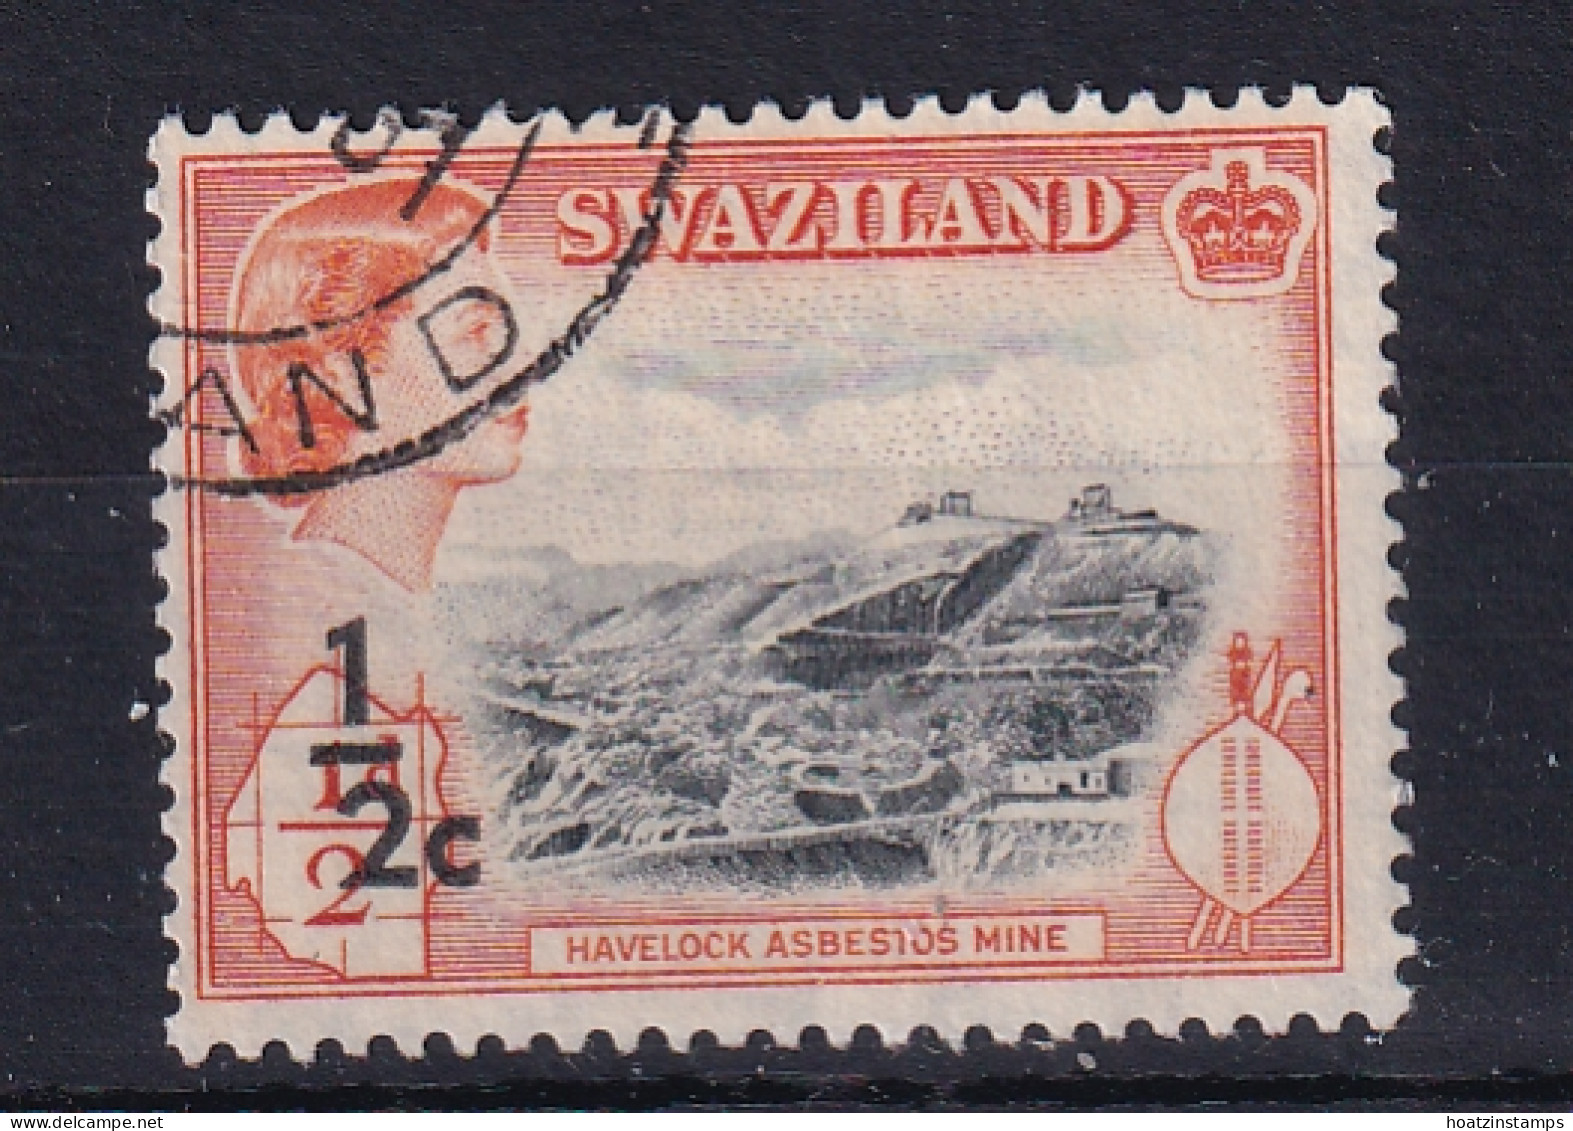 Swaziland: 1961   QE II - Decimal Currency Surcharge   SG65b   ½c On ½d  [Type II]   Used    - Swaziland (...-1967)